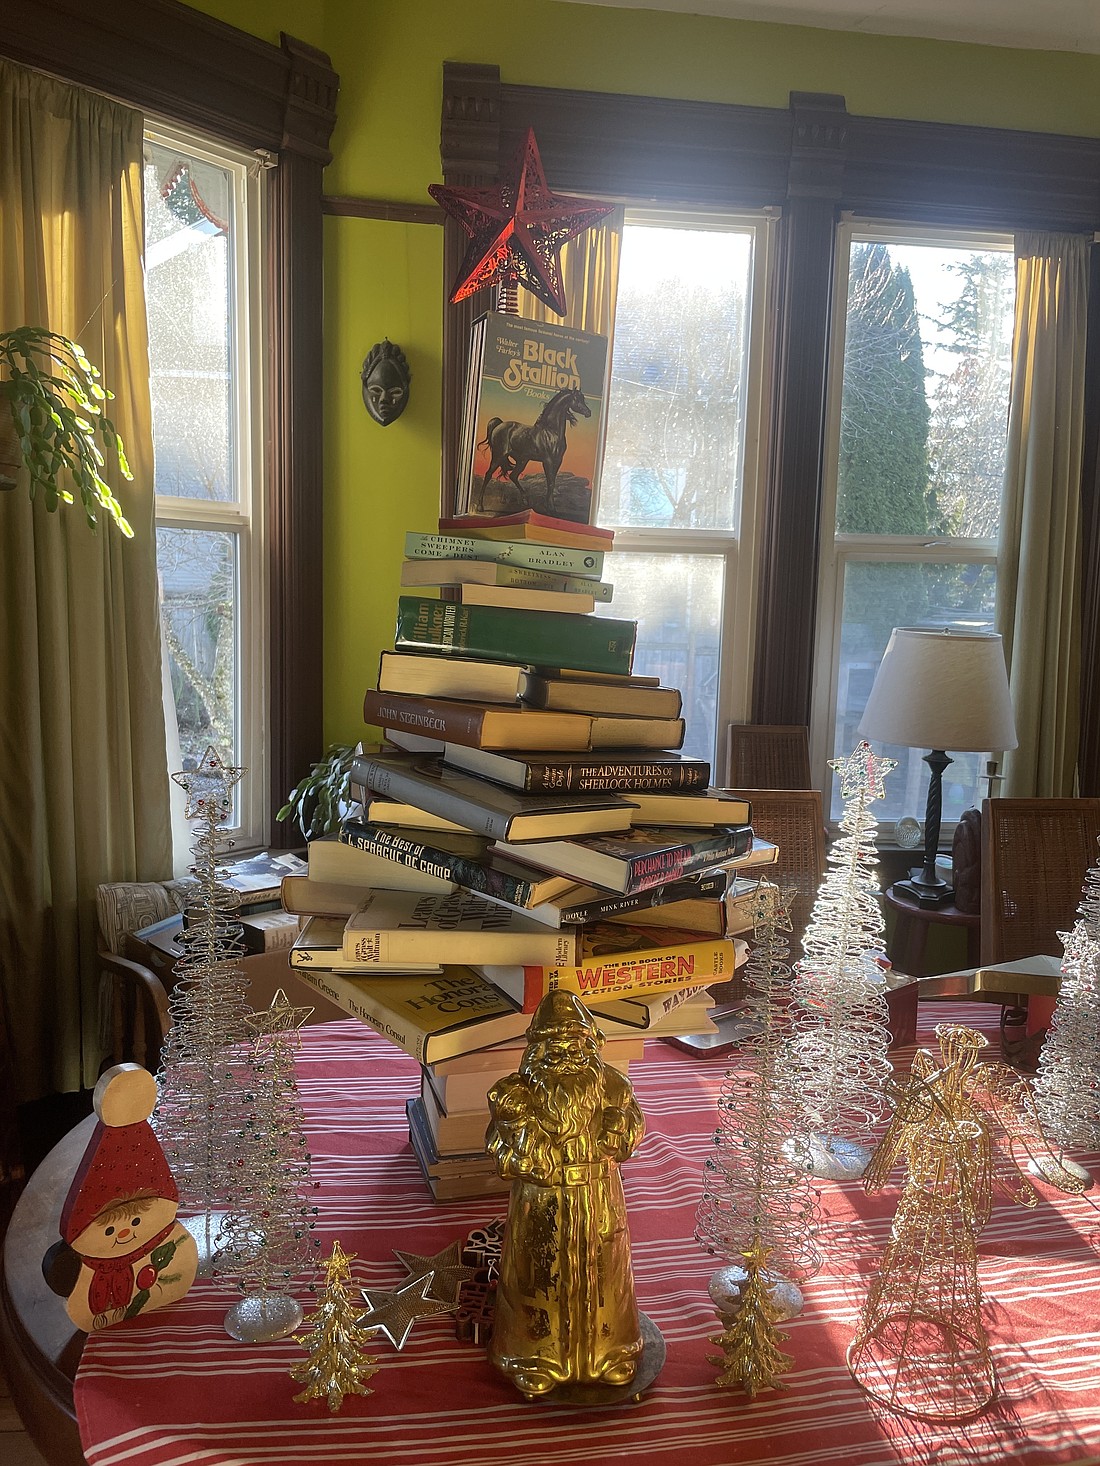 If you're looking to give the gift of reading this year, suggestions from local librarians and booksellers will guide the way. If you have so many books in your house you can make a Christmas tree out of them, consider giving some of your favorites as gifts to clear out bookshelf space.